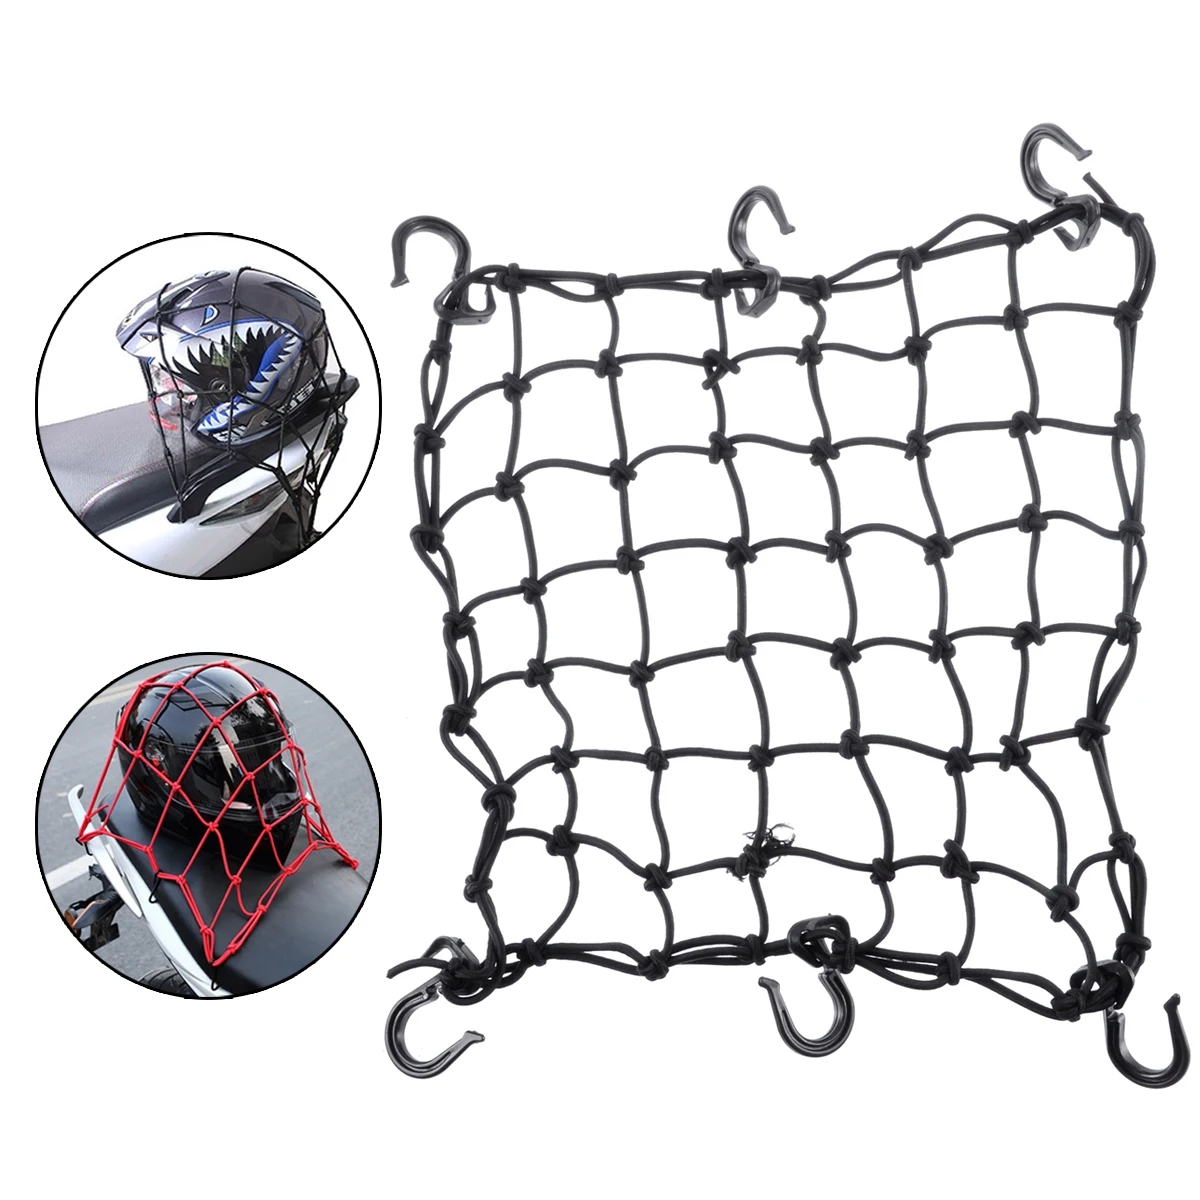 For Moto Bike Protective Gears 1PC Hold Down Helmet Cargo Luggage Protect Net Fuel Tank Mesh Web Organiser 6 Hook 15"x15"